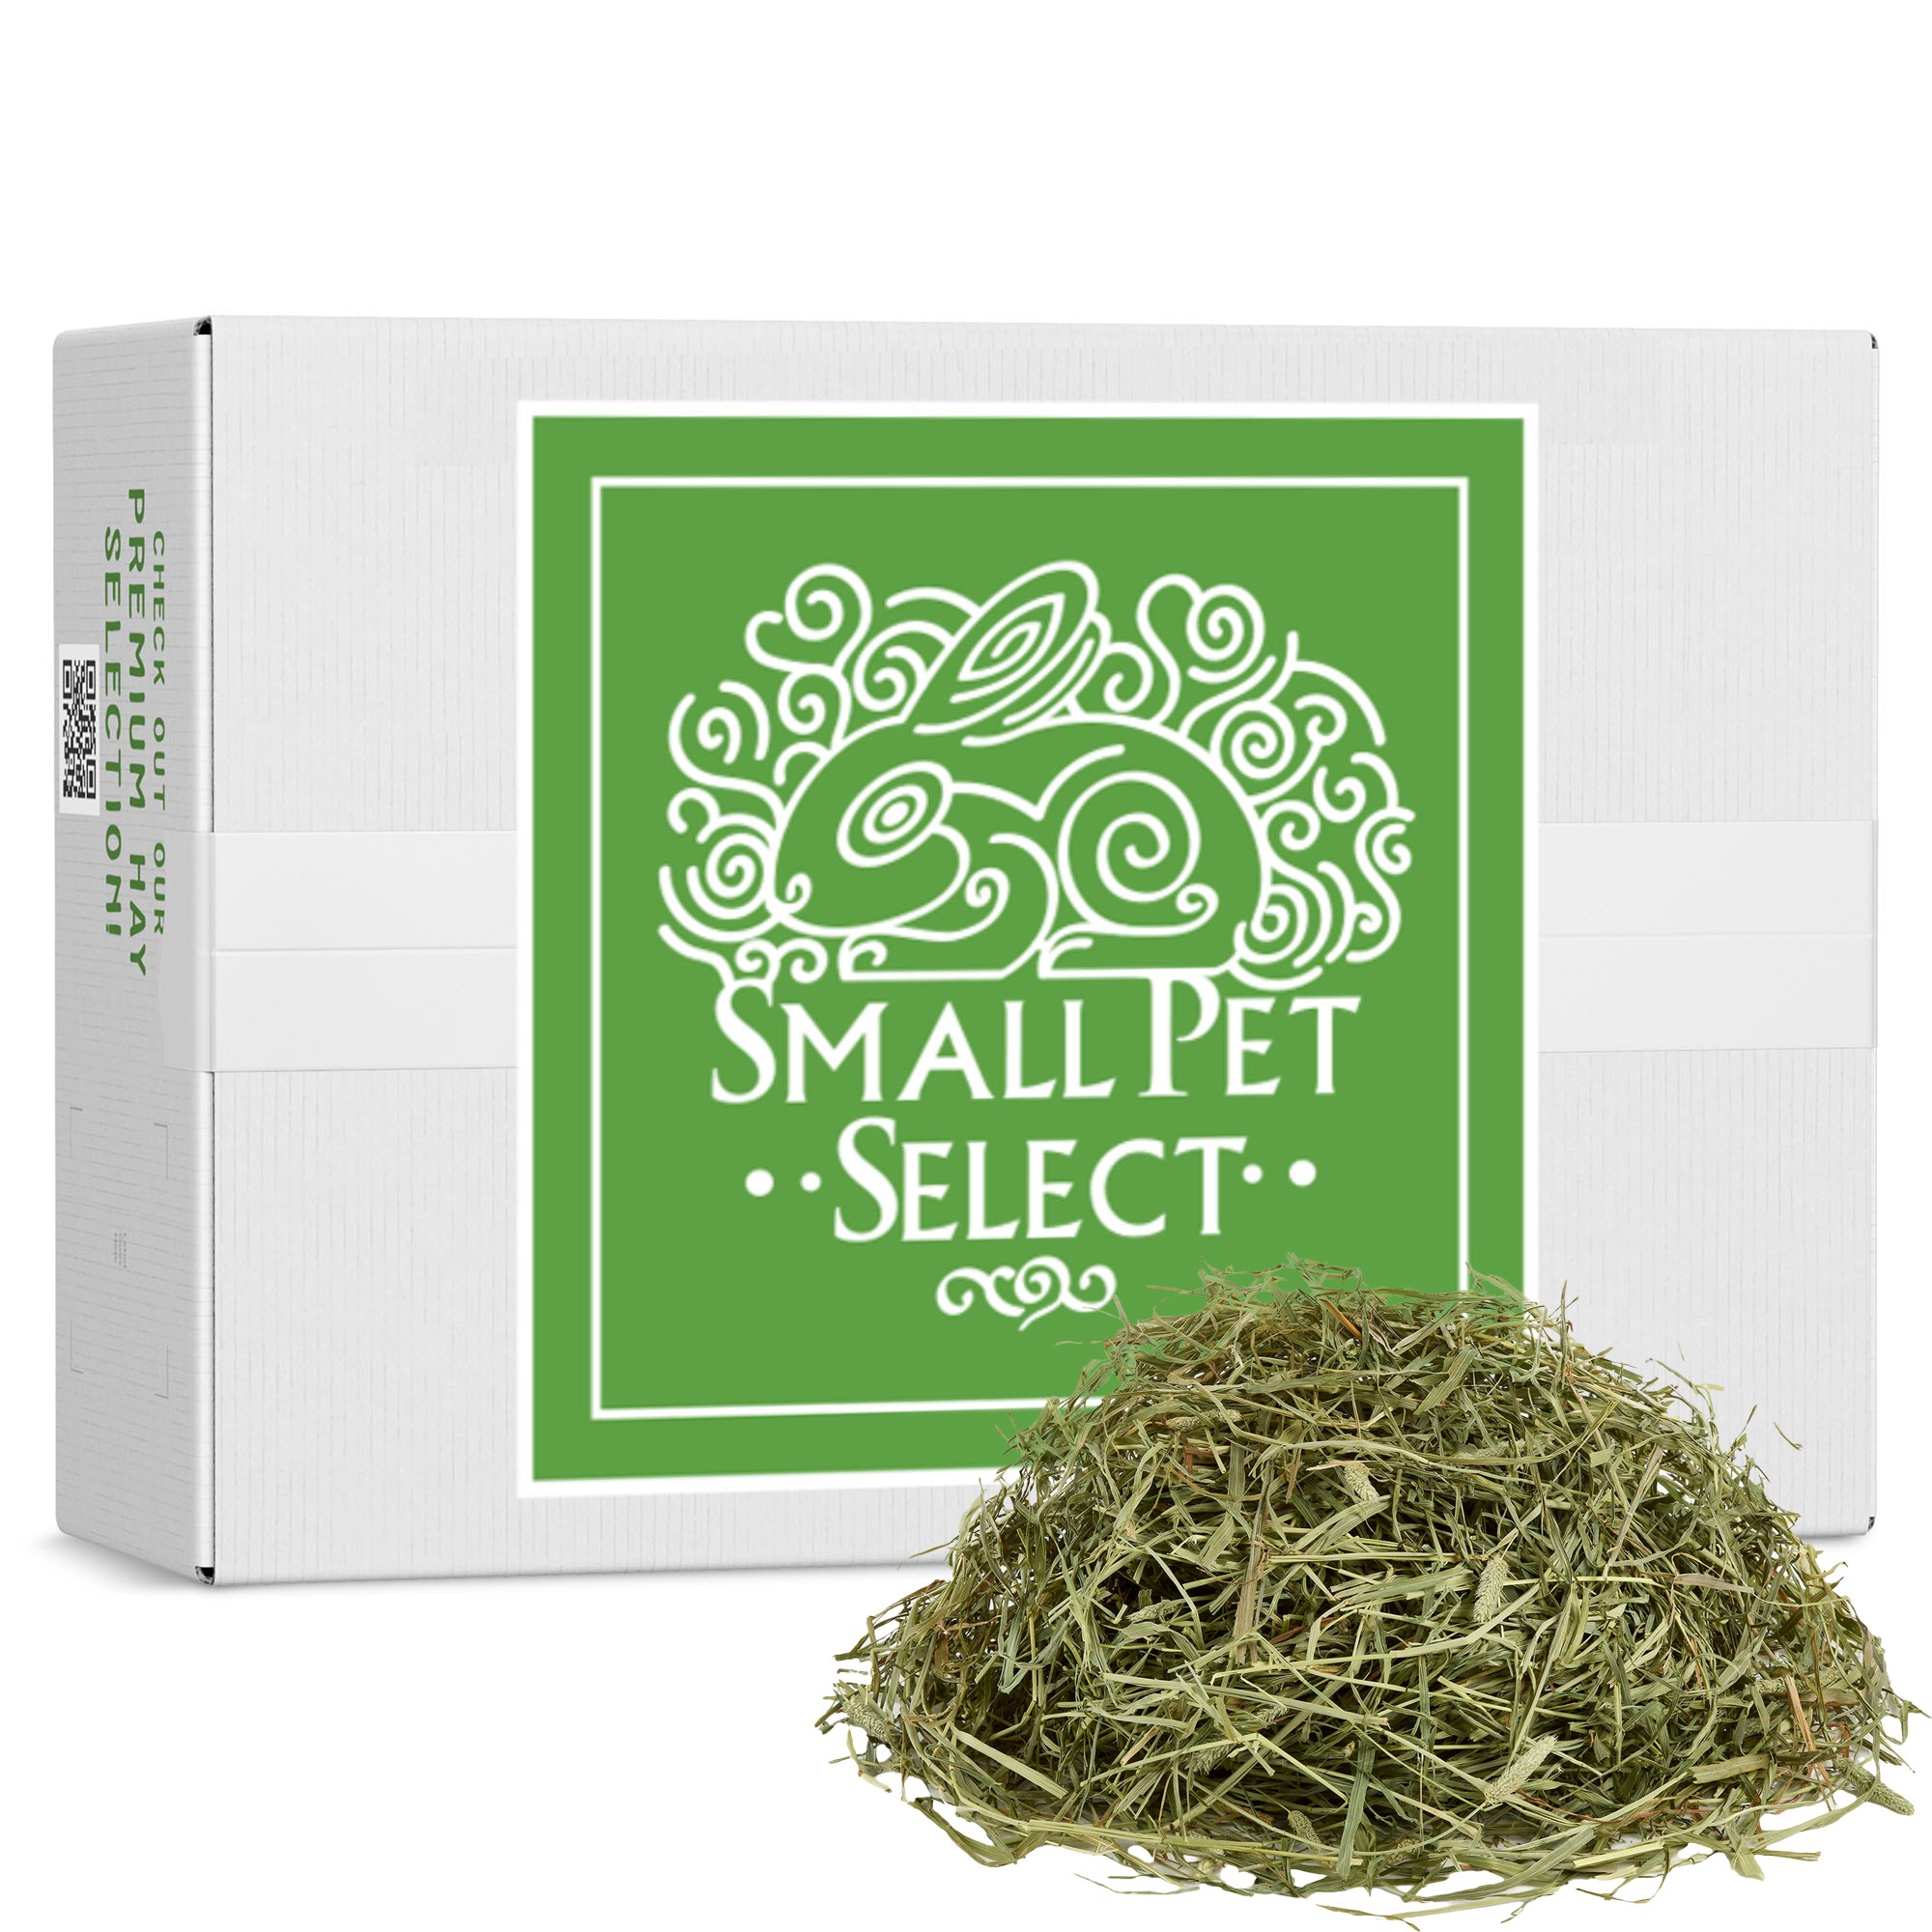 https://shop.smallpetselect.com/collections/hay/products/2nd-cutting-timothy-hay?variant=1163285933